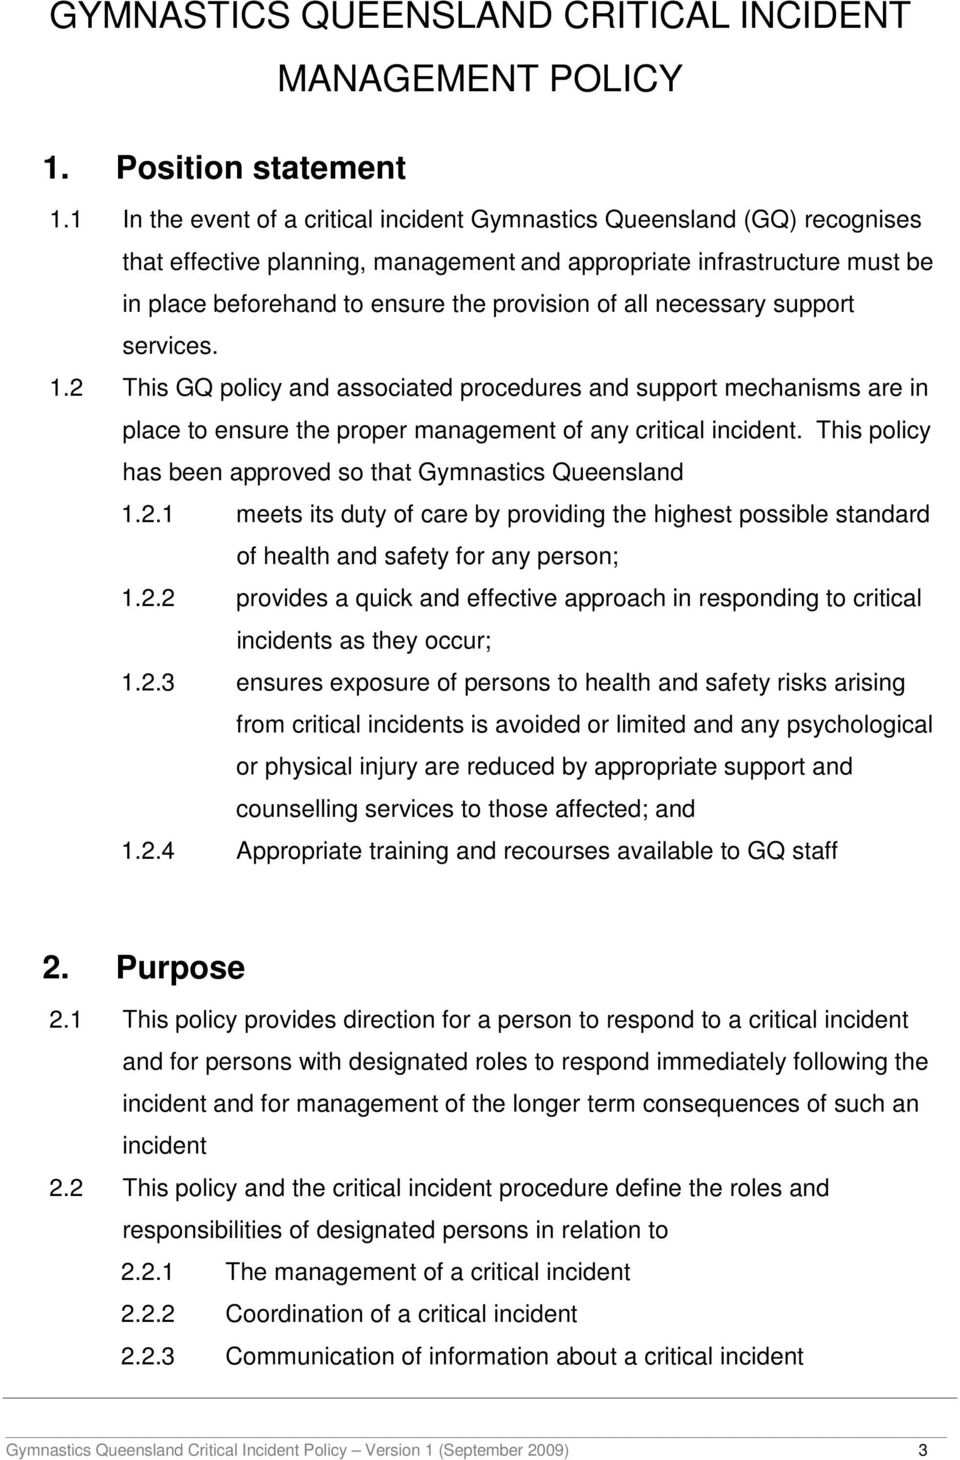 all necessary support services. 1.2 This GQ policy and associated procedures and support mechanisms are in place to ensure the proper management of any critical incident.